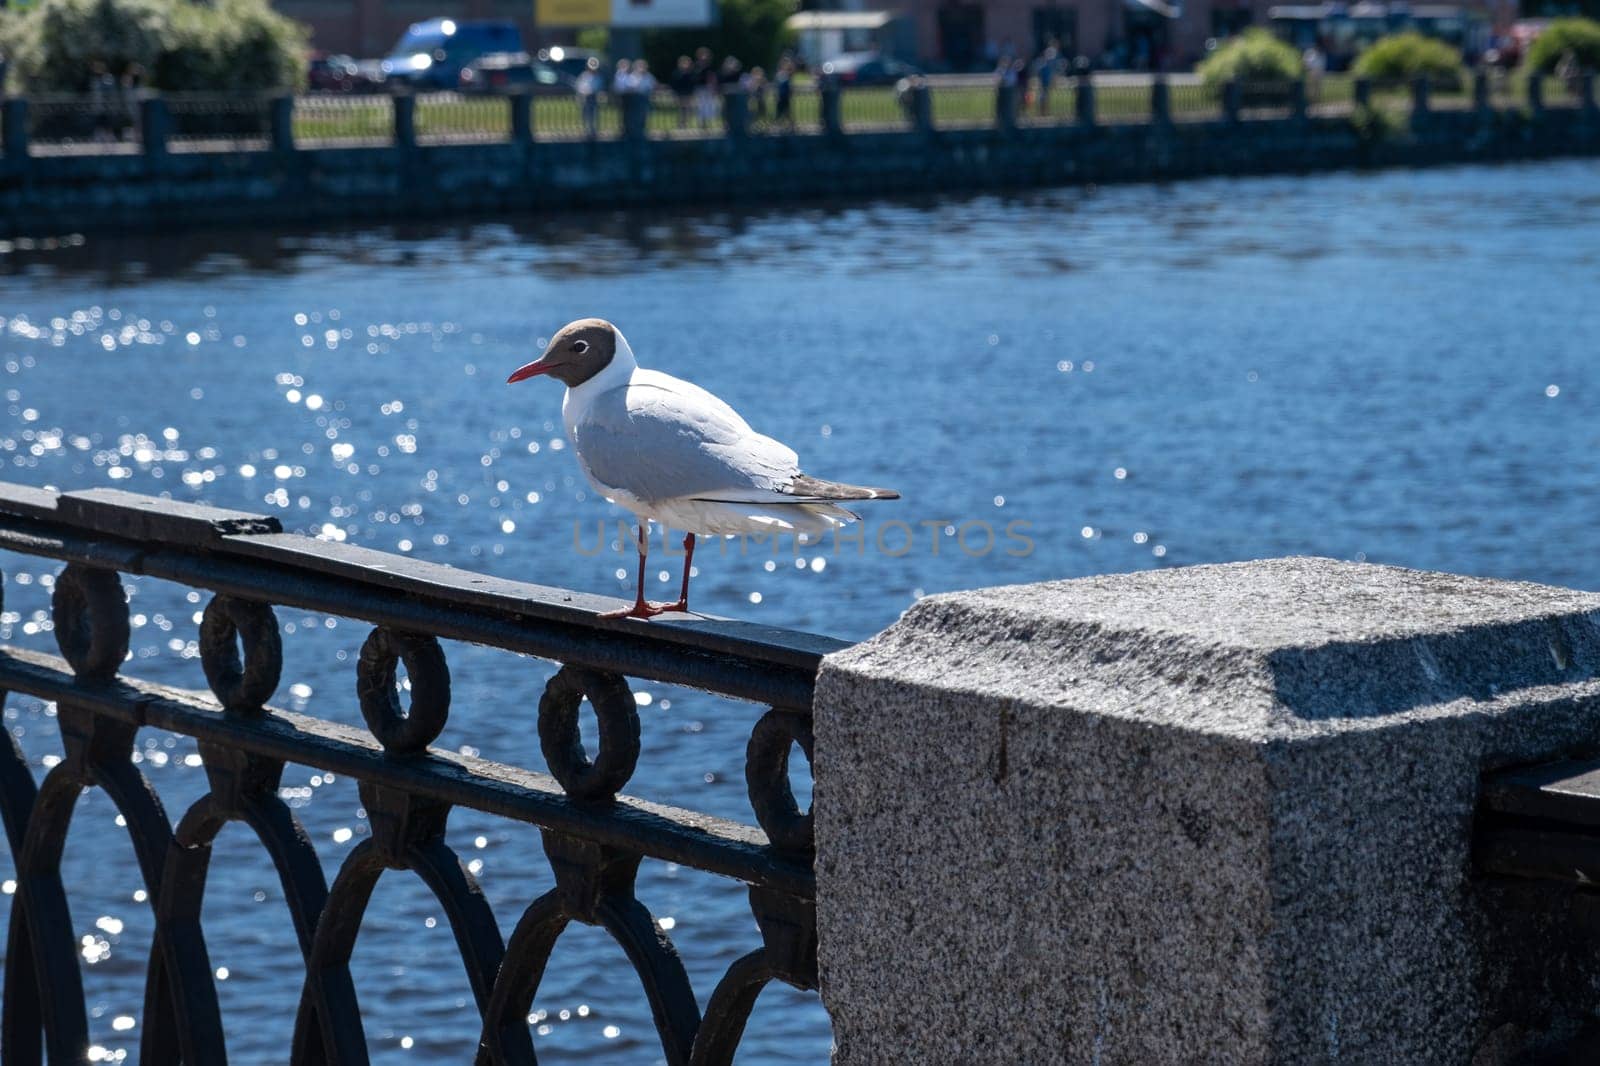 Close-up of a seagull sitting on the embankment fence in the city. by OlgaGubskaya